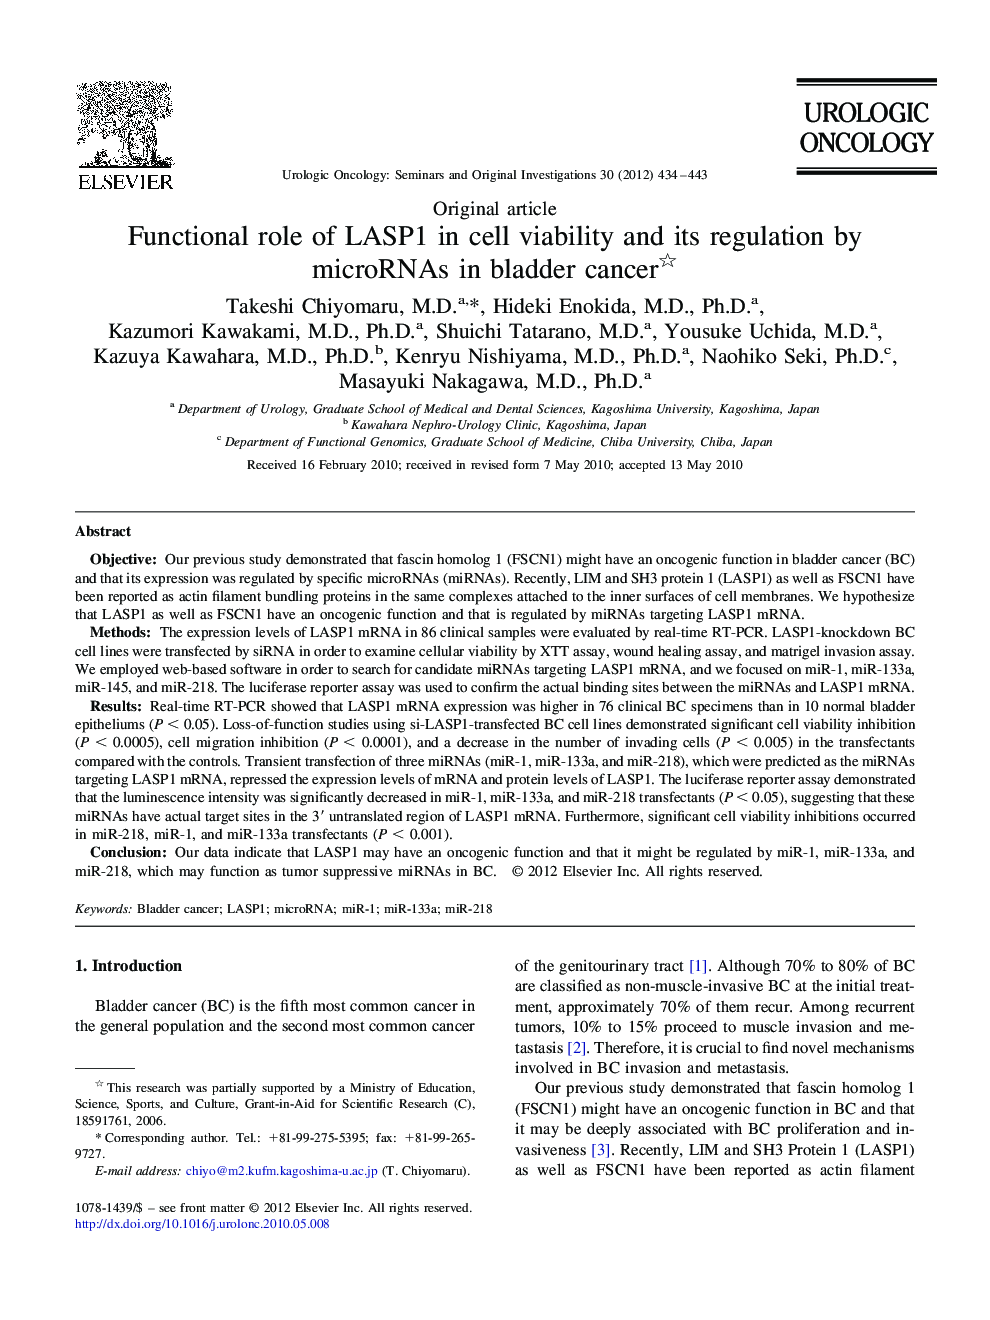 Functional role of LASP1 in cell viability and its regulation by microRNAs in bladder cancer 